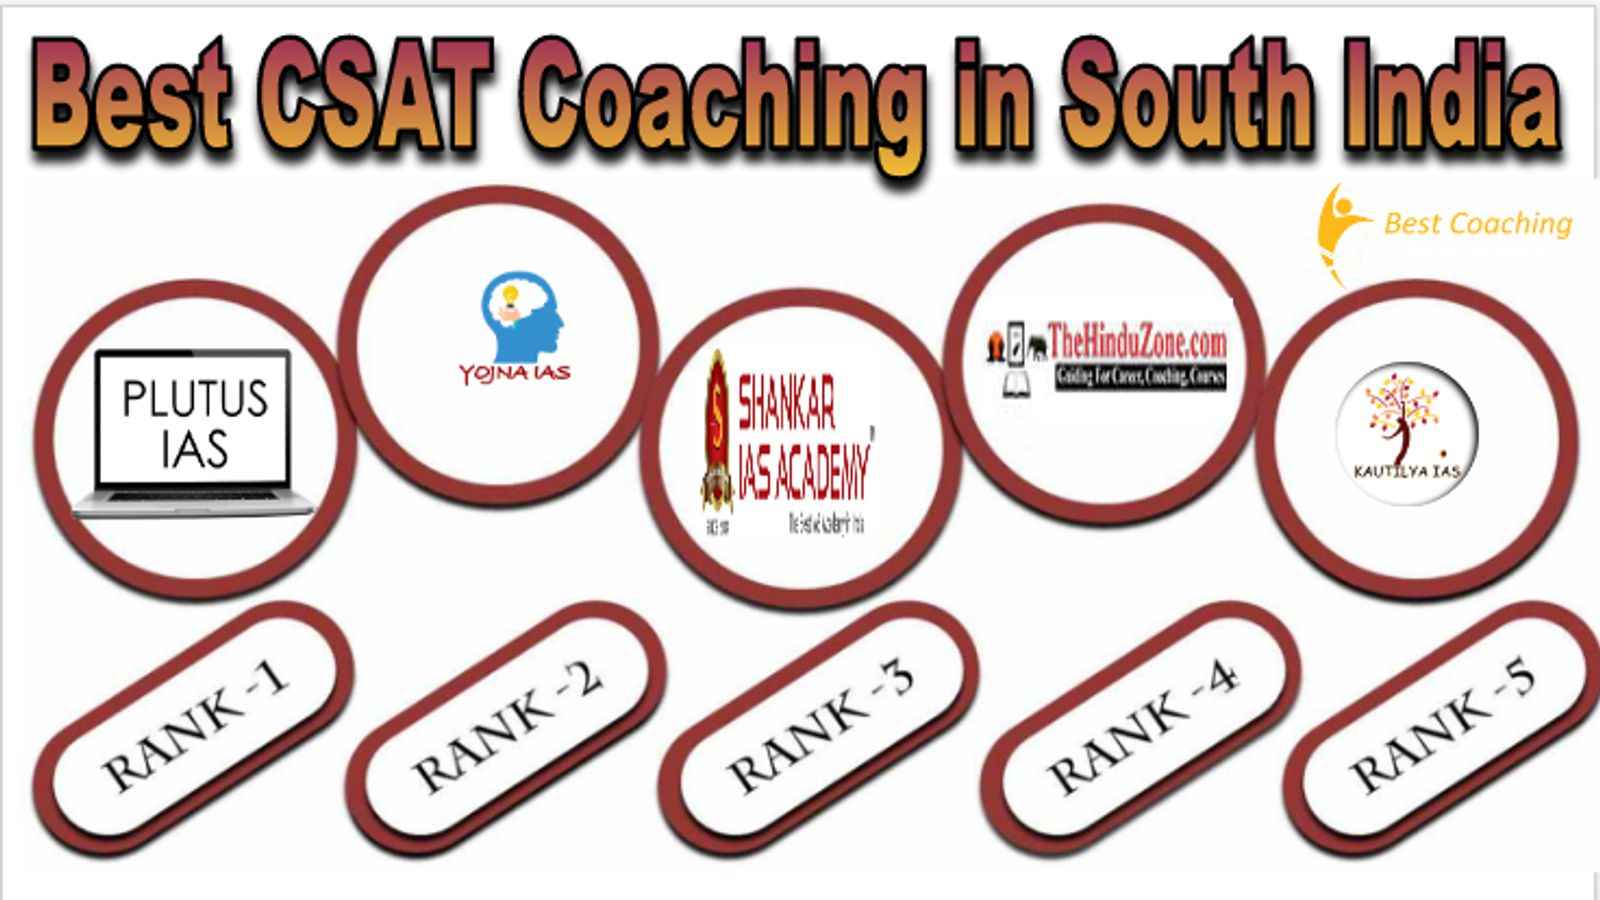 Best CSAT Coaching in South India